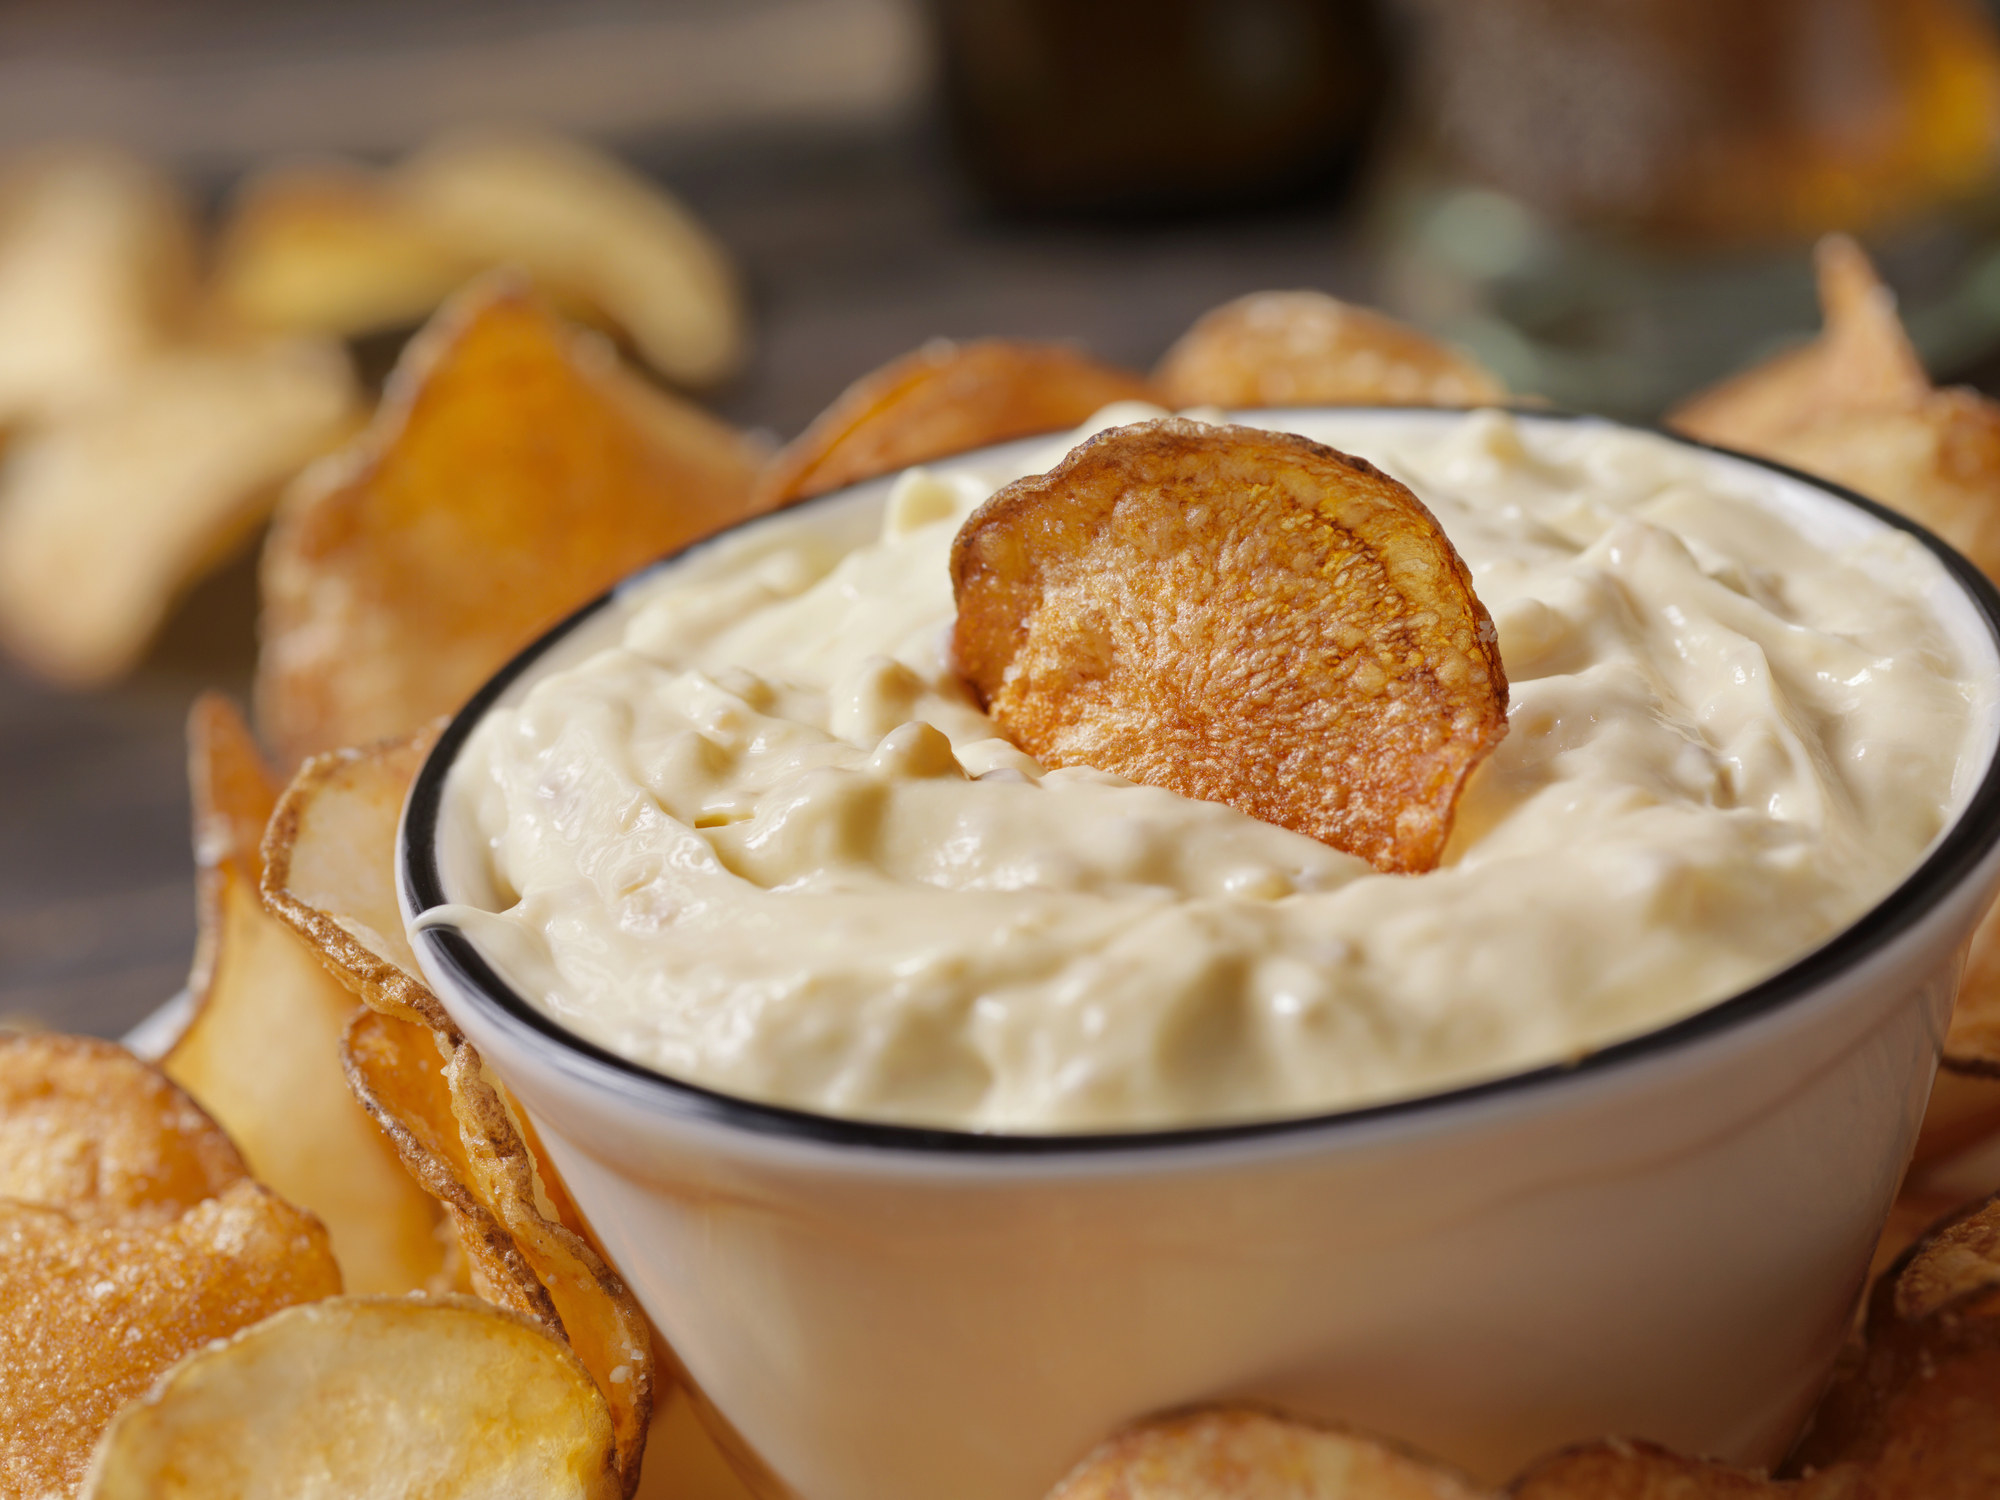 Onion soup dip with chips.